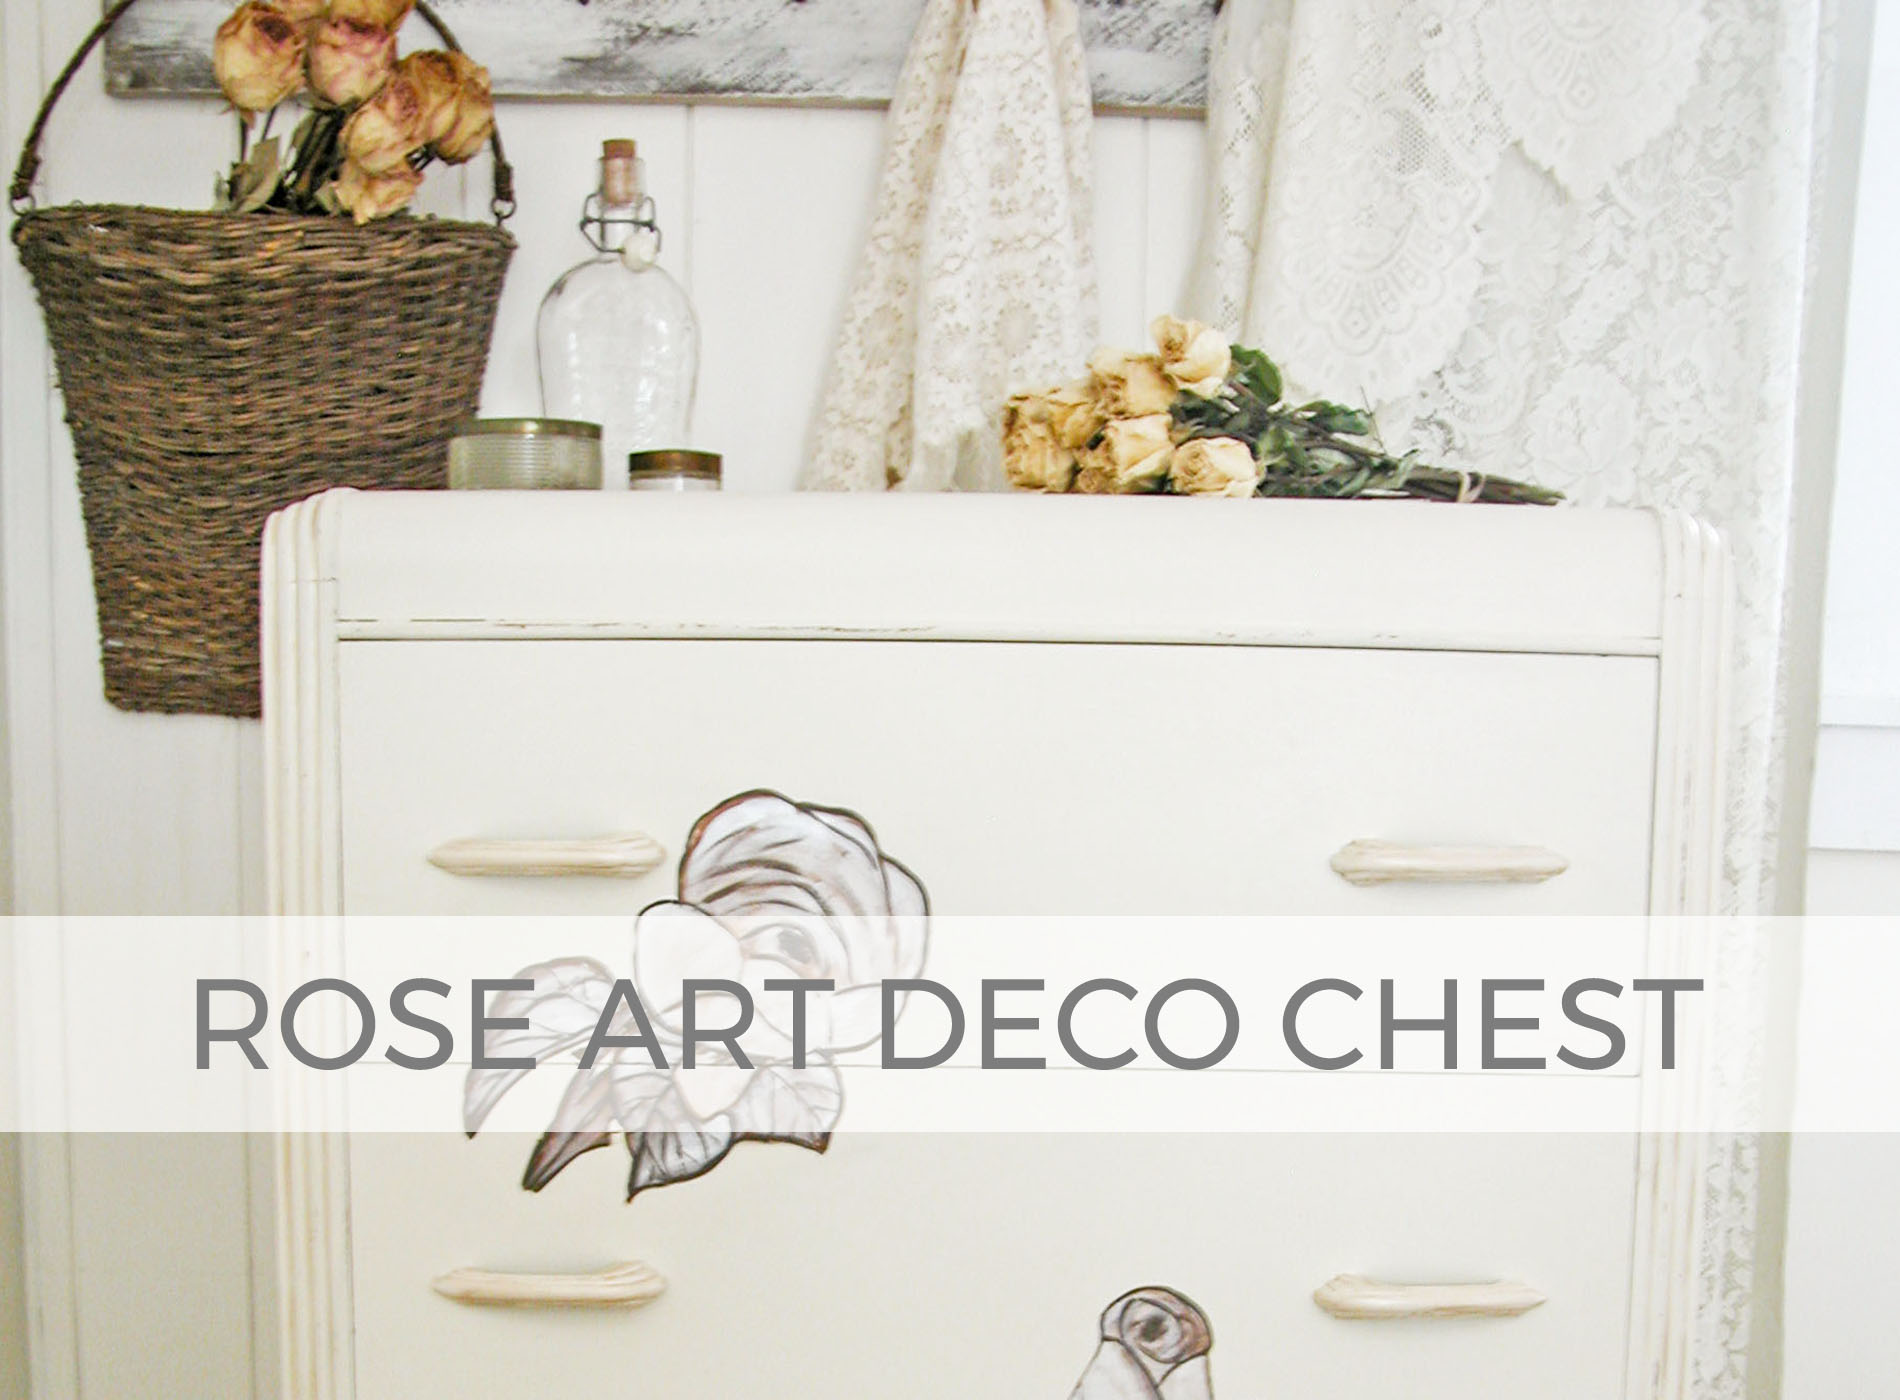 Art Deco Chest with Rose Painting by Larissa of Prodigal Pieces | prodigalpieces.com